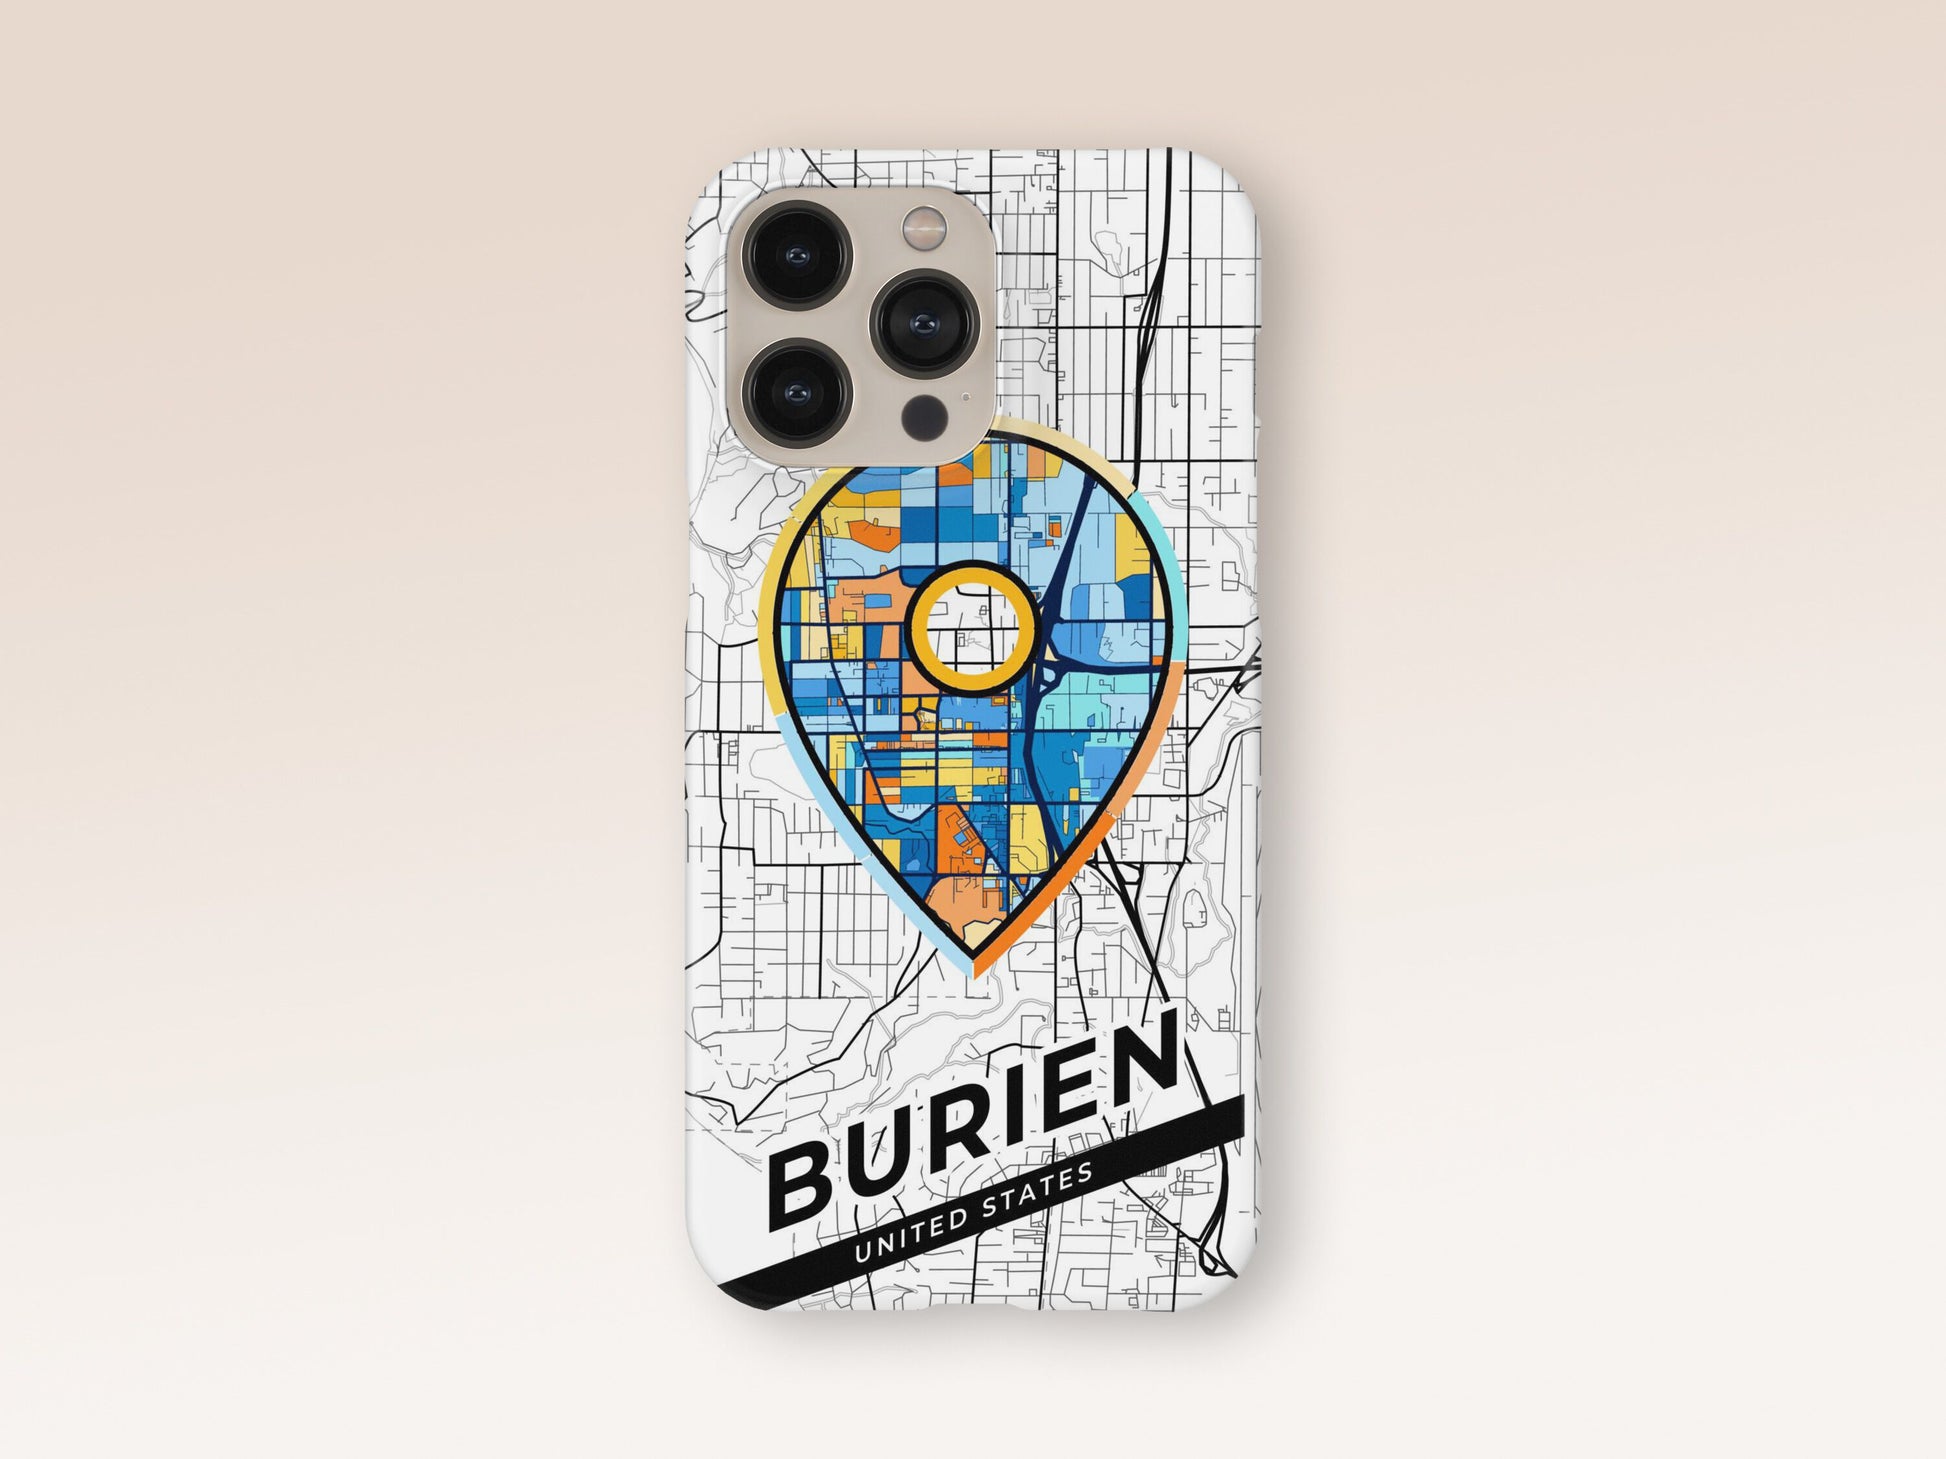 Burien Washington slim phone case with colorful icon. Birthday, wedding or housewarming gift. Couple match cases. 1